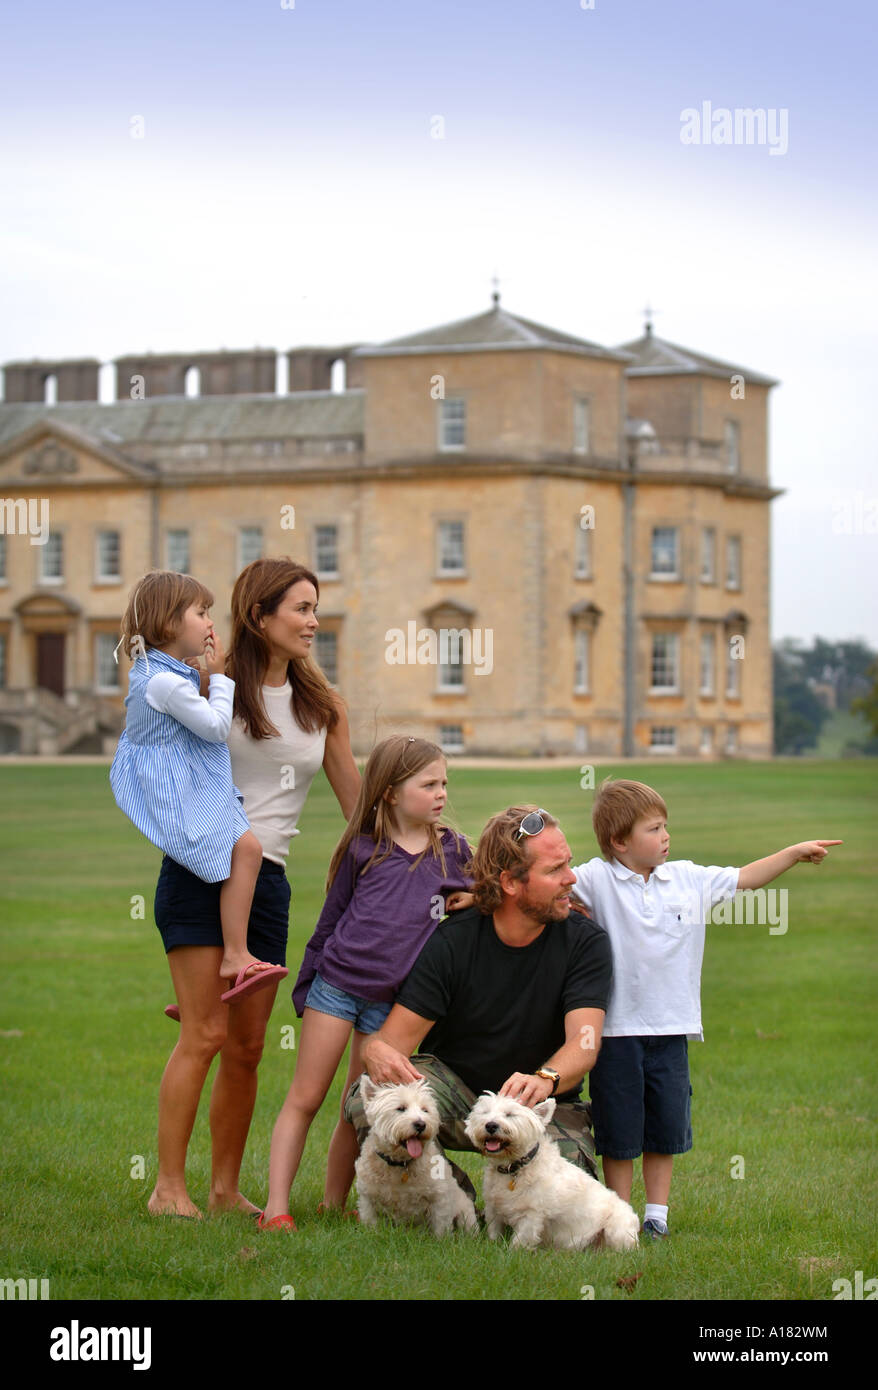 A FAMILY GROUP ON A COUNTRY ESTATE UK Stock Photo